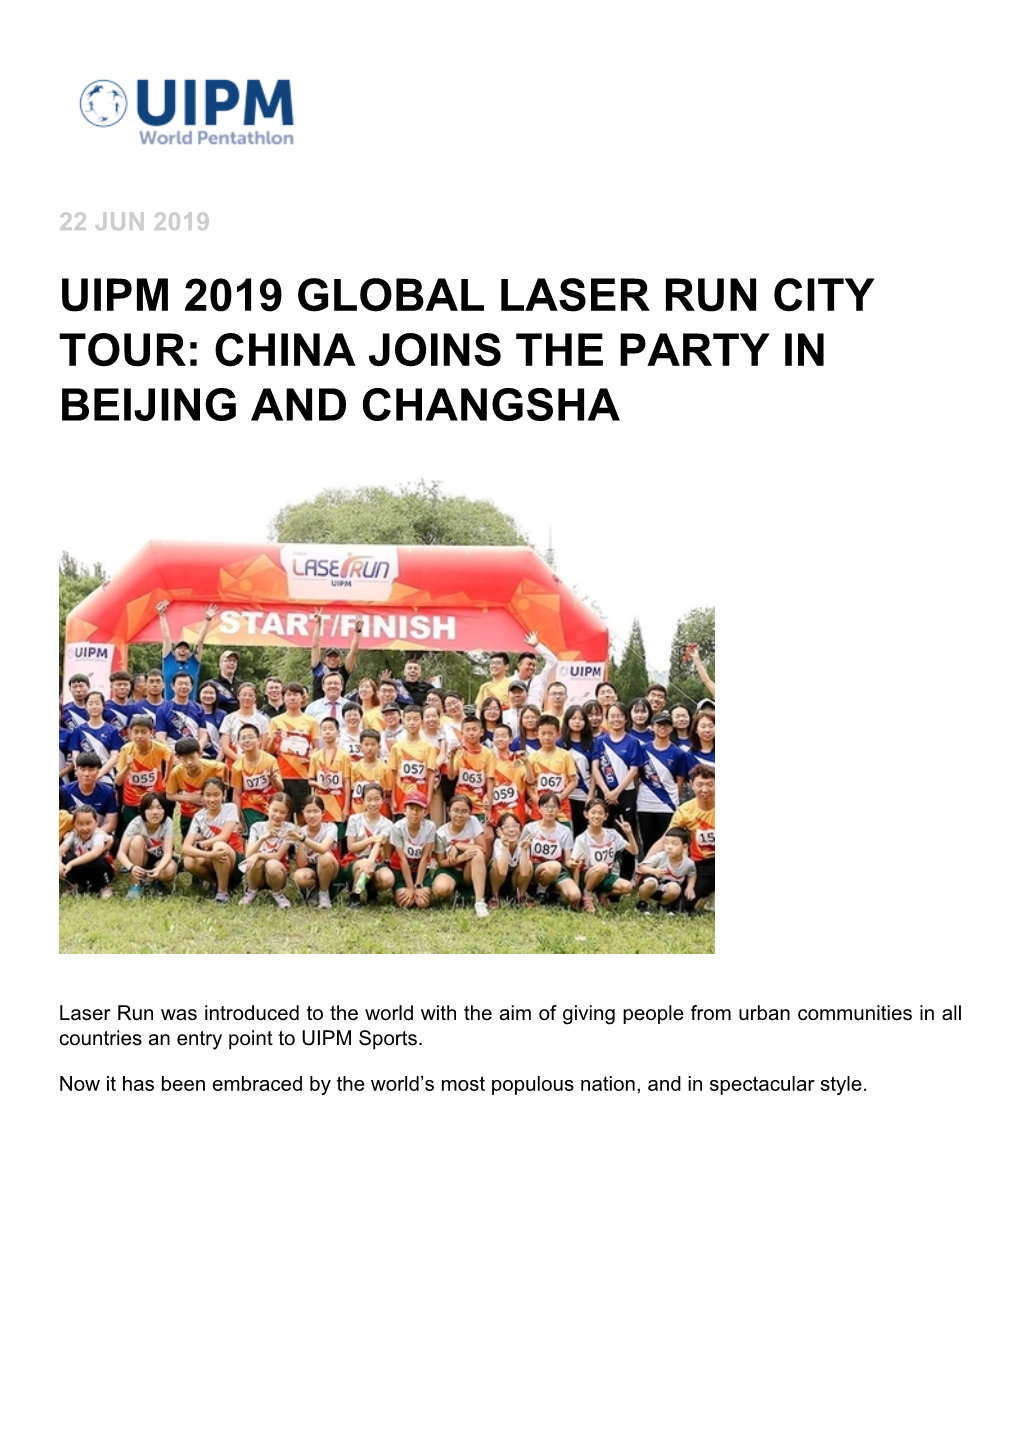 Uipm 2019 Global Laser Run City Tour: China Joins the Party in Beijing and Changsha